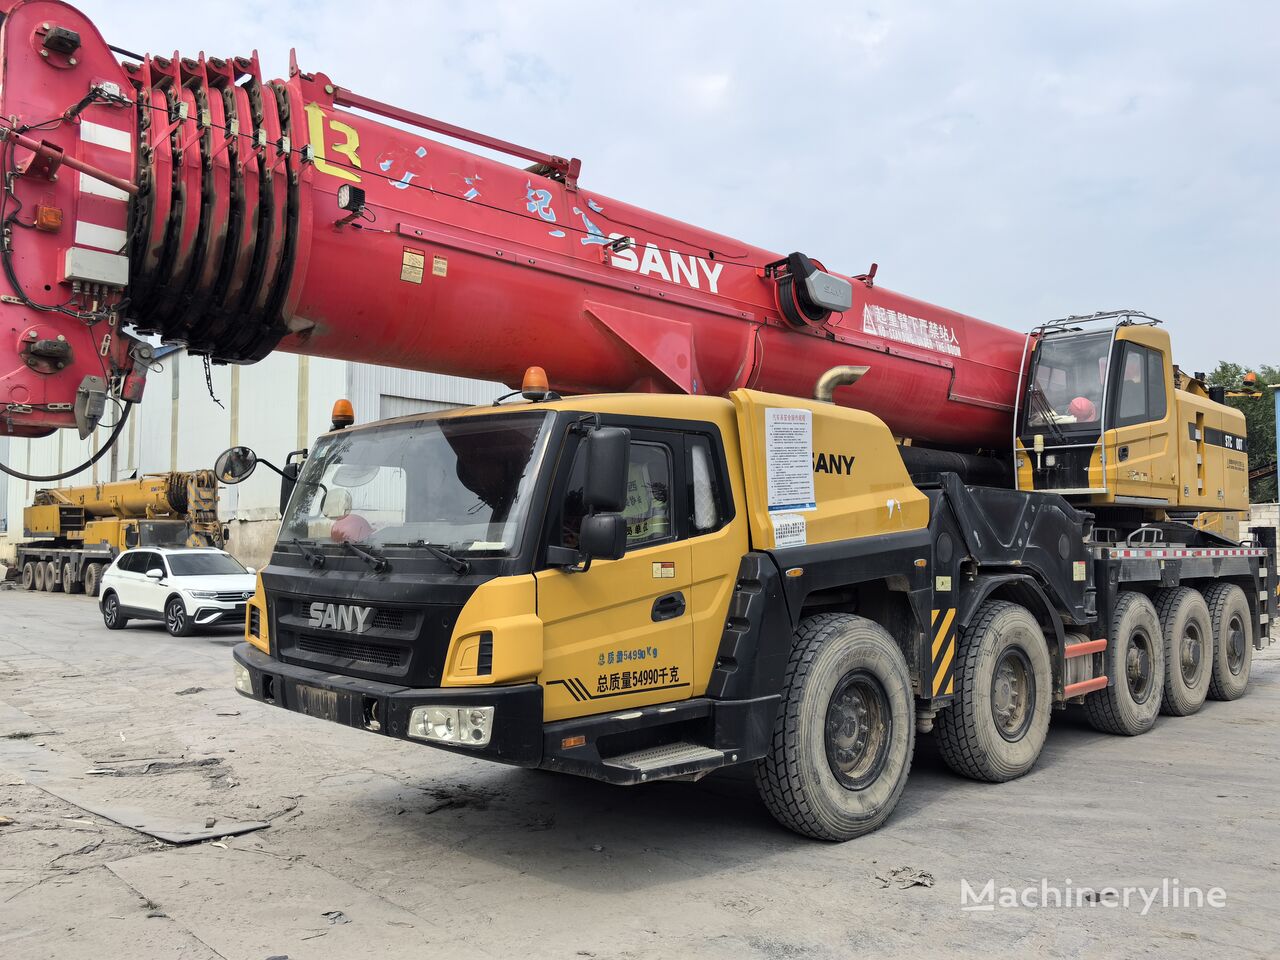 grue mobile Sany Sany STC1000 100 ton 100t 100tons used mounted truck crane